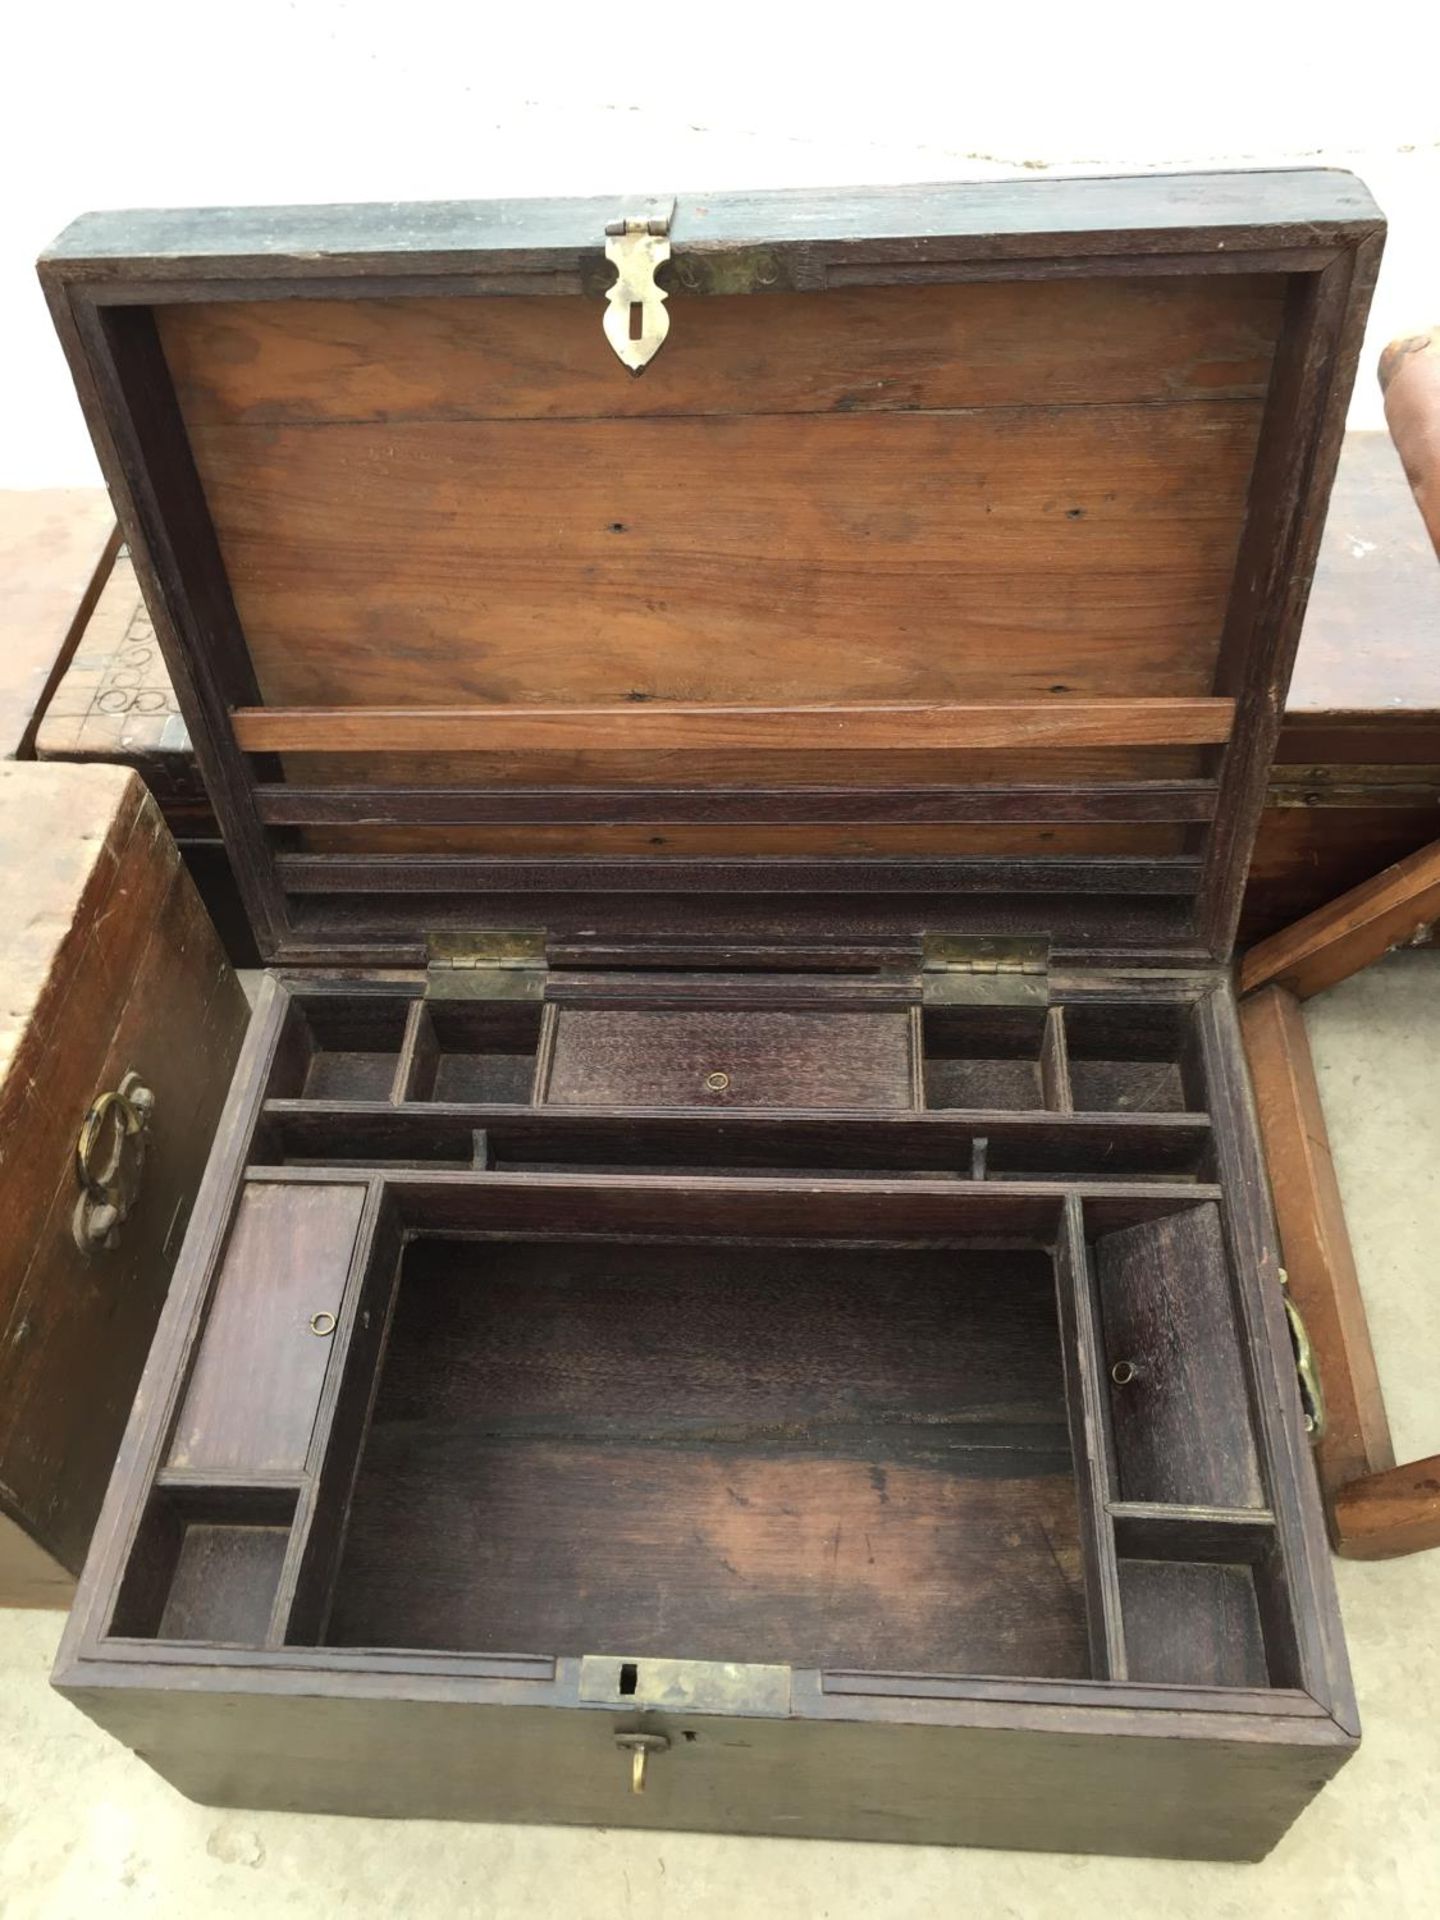 AN INDIAN HARDWOOD WRITING BOX WITH BRASS FITTINGS, 21" WIDE - Image 3 of 3